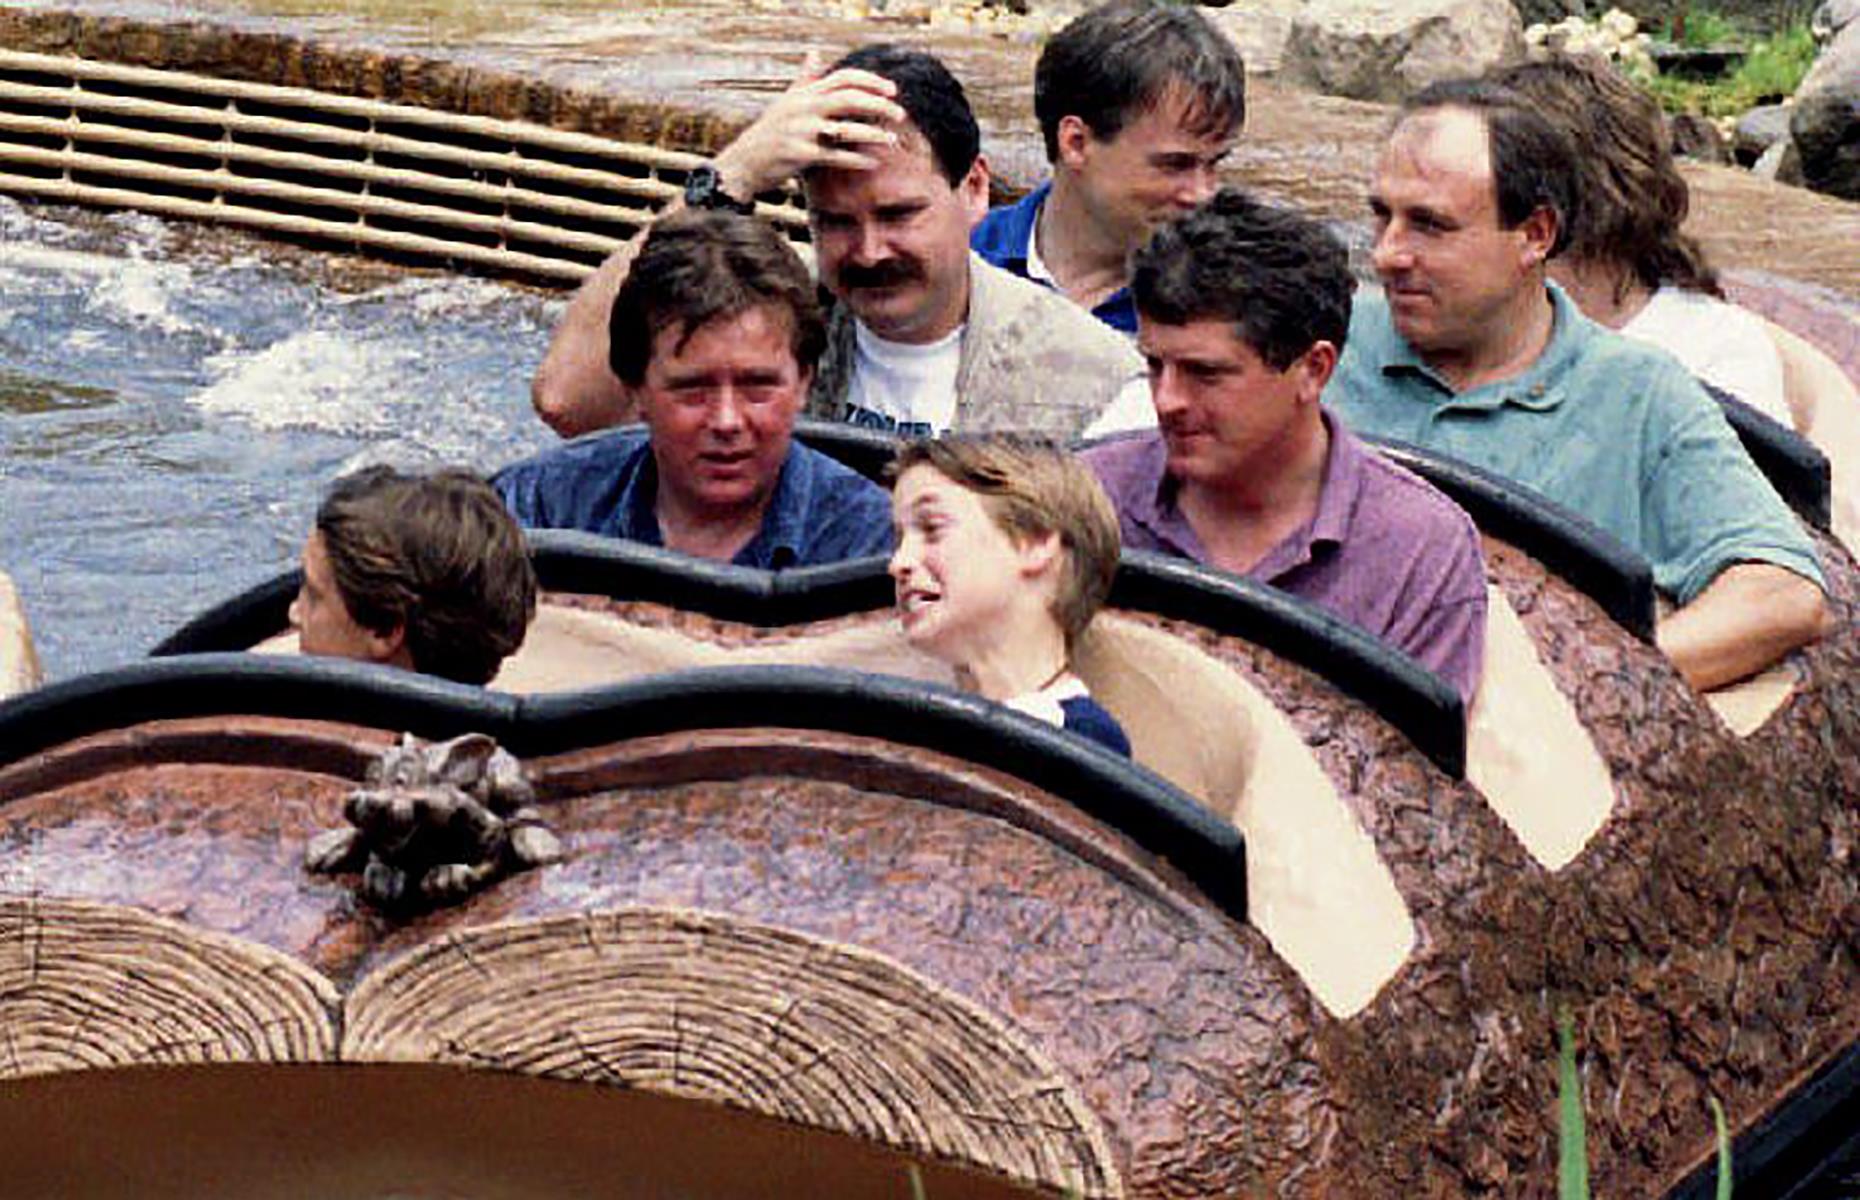 <p>Walt Disney World continued to boom through the 1990s, with Disney's Animal Kingdom eventually opening in 1998. The park even had some special royal guests during this decade. The late Princess Diana, and a young Prince Harry and Prince William holidayed here in 1993. An 11-year-old Prince William is pictured (front right) enjoying a ride on the Magic Kingdom's Splash Mountain. Now discover <a href="https://www.loveexploring.com/galleries/82470/floridas-incredible-transformation-from-swampland-to-holiday-paradise?page=1">Florida's incredible transformation from swampland to vacation paradise</a>.</p>